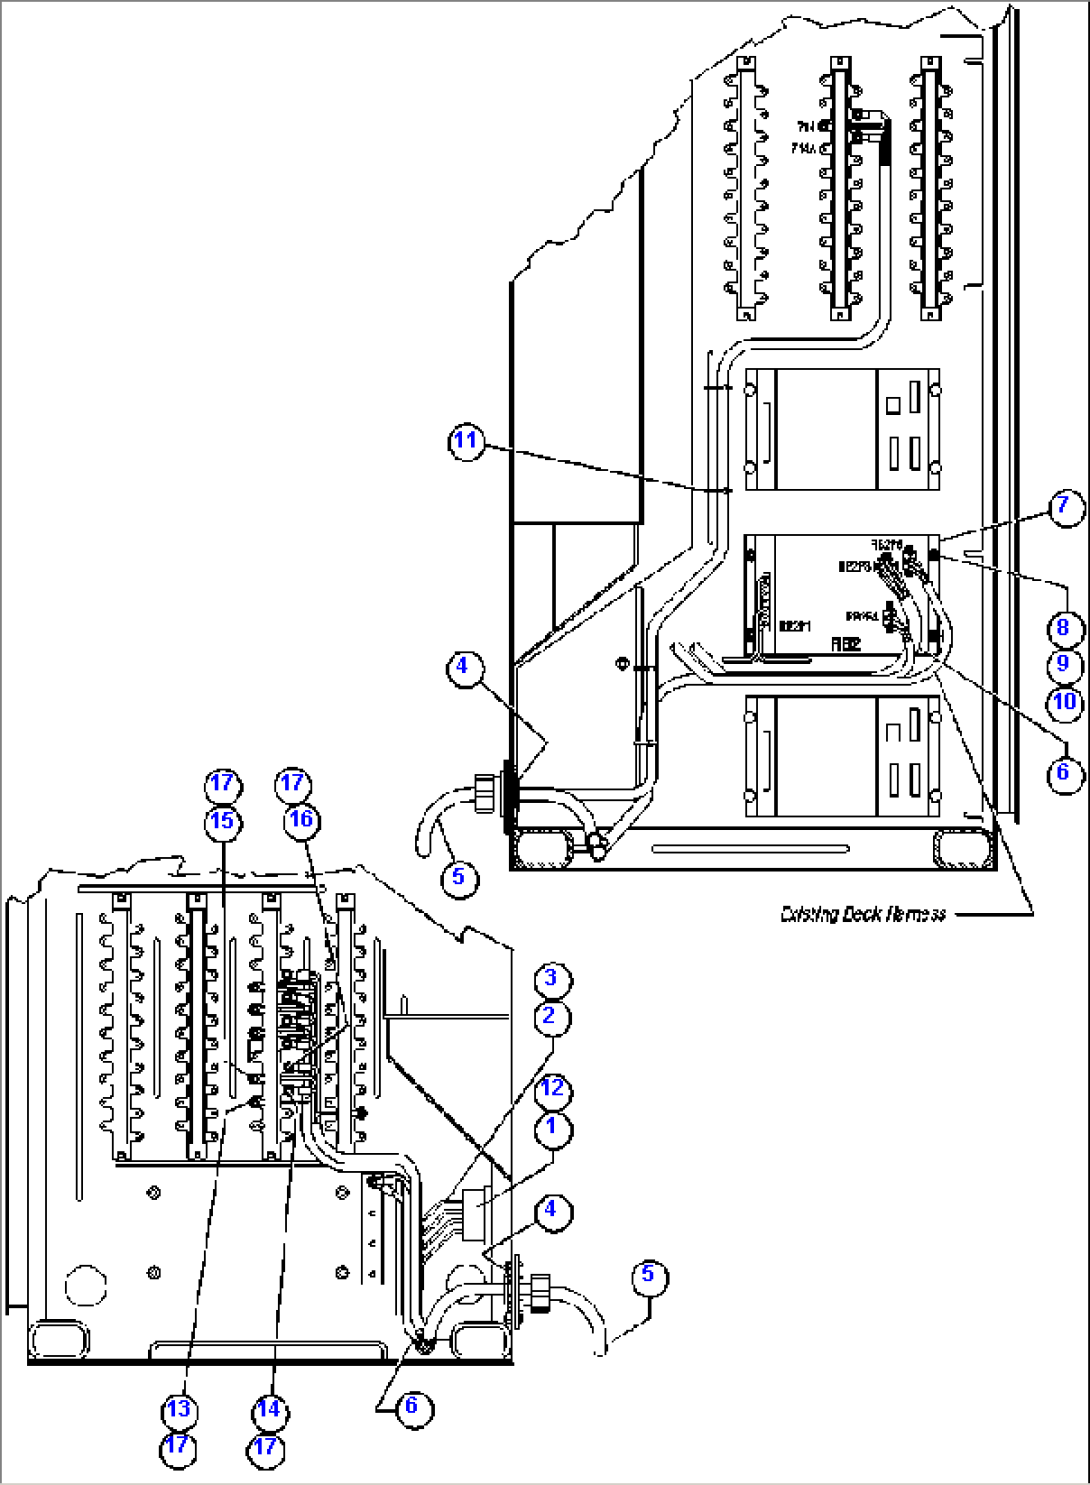 PAYLOAD METER SYSTEM - 1